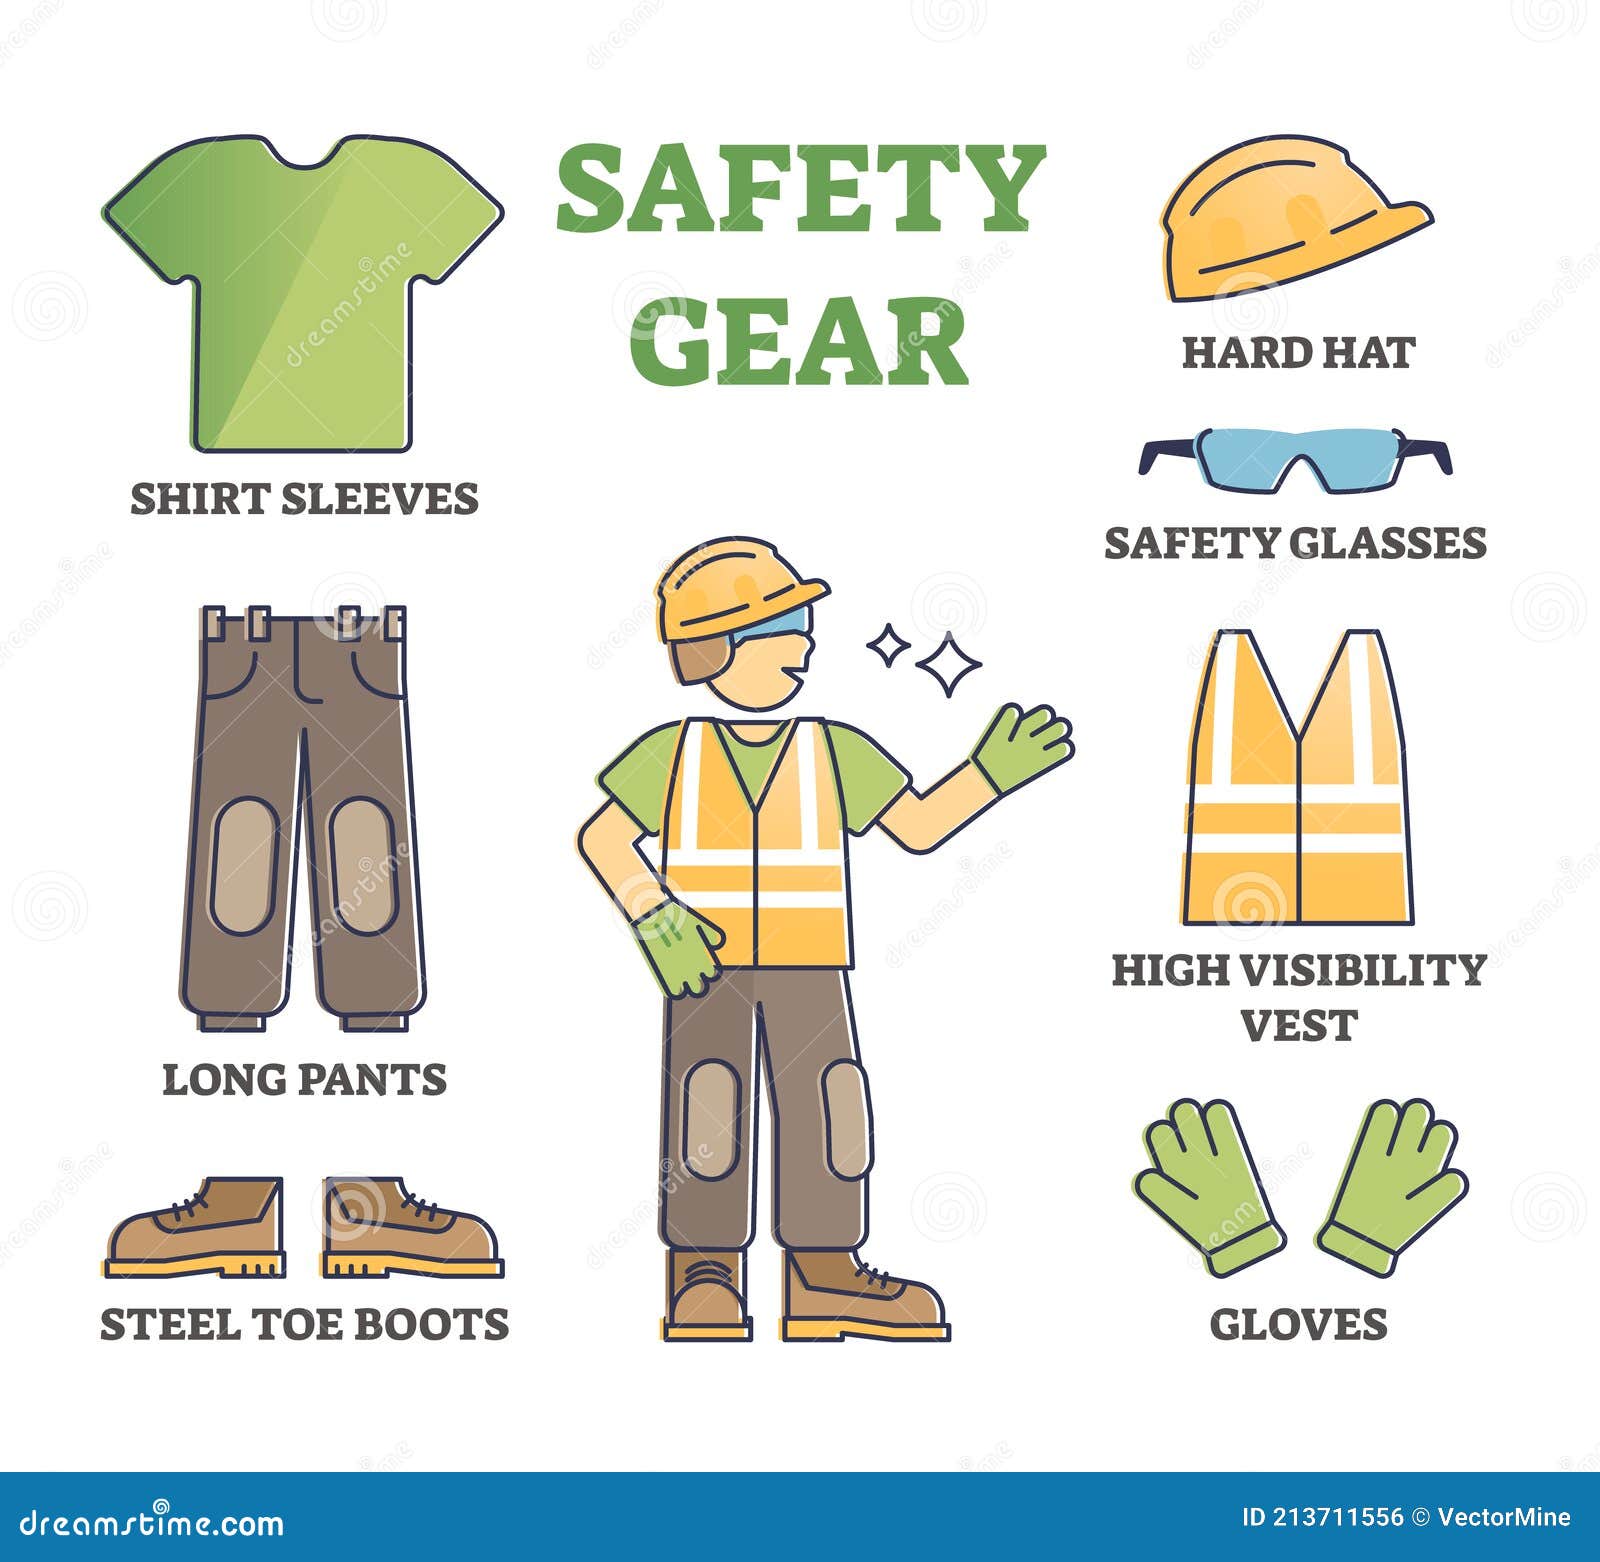 https://thumbs.dreamstime.com/z/safety-gear-collection-as-worker-equipment-construction-site-outline-set-individual-protection-clothing-hard-hat-glasses-213711556.jpg